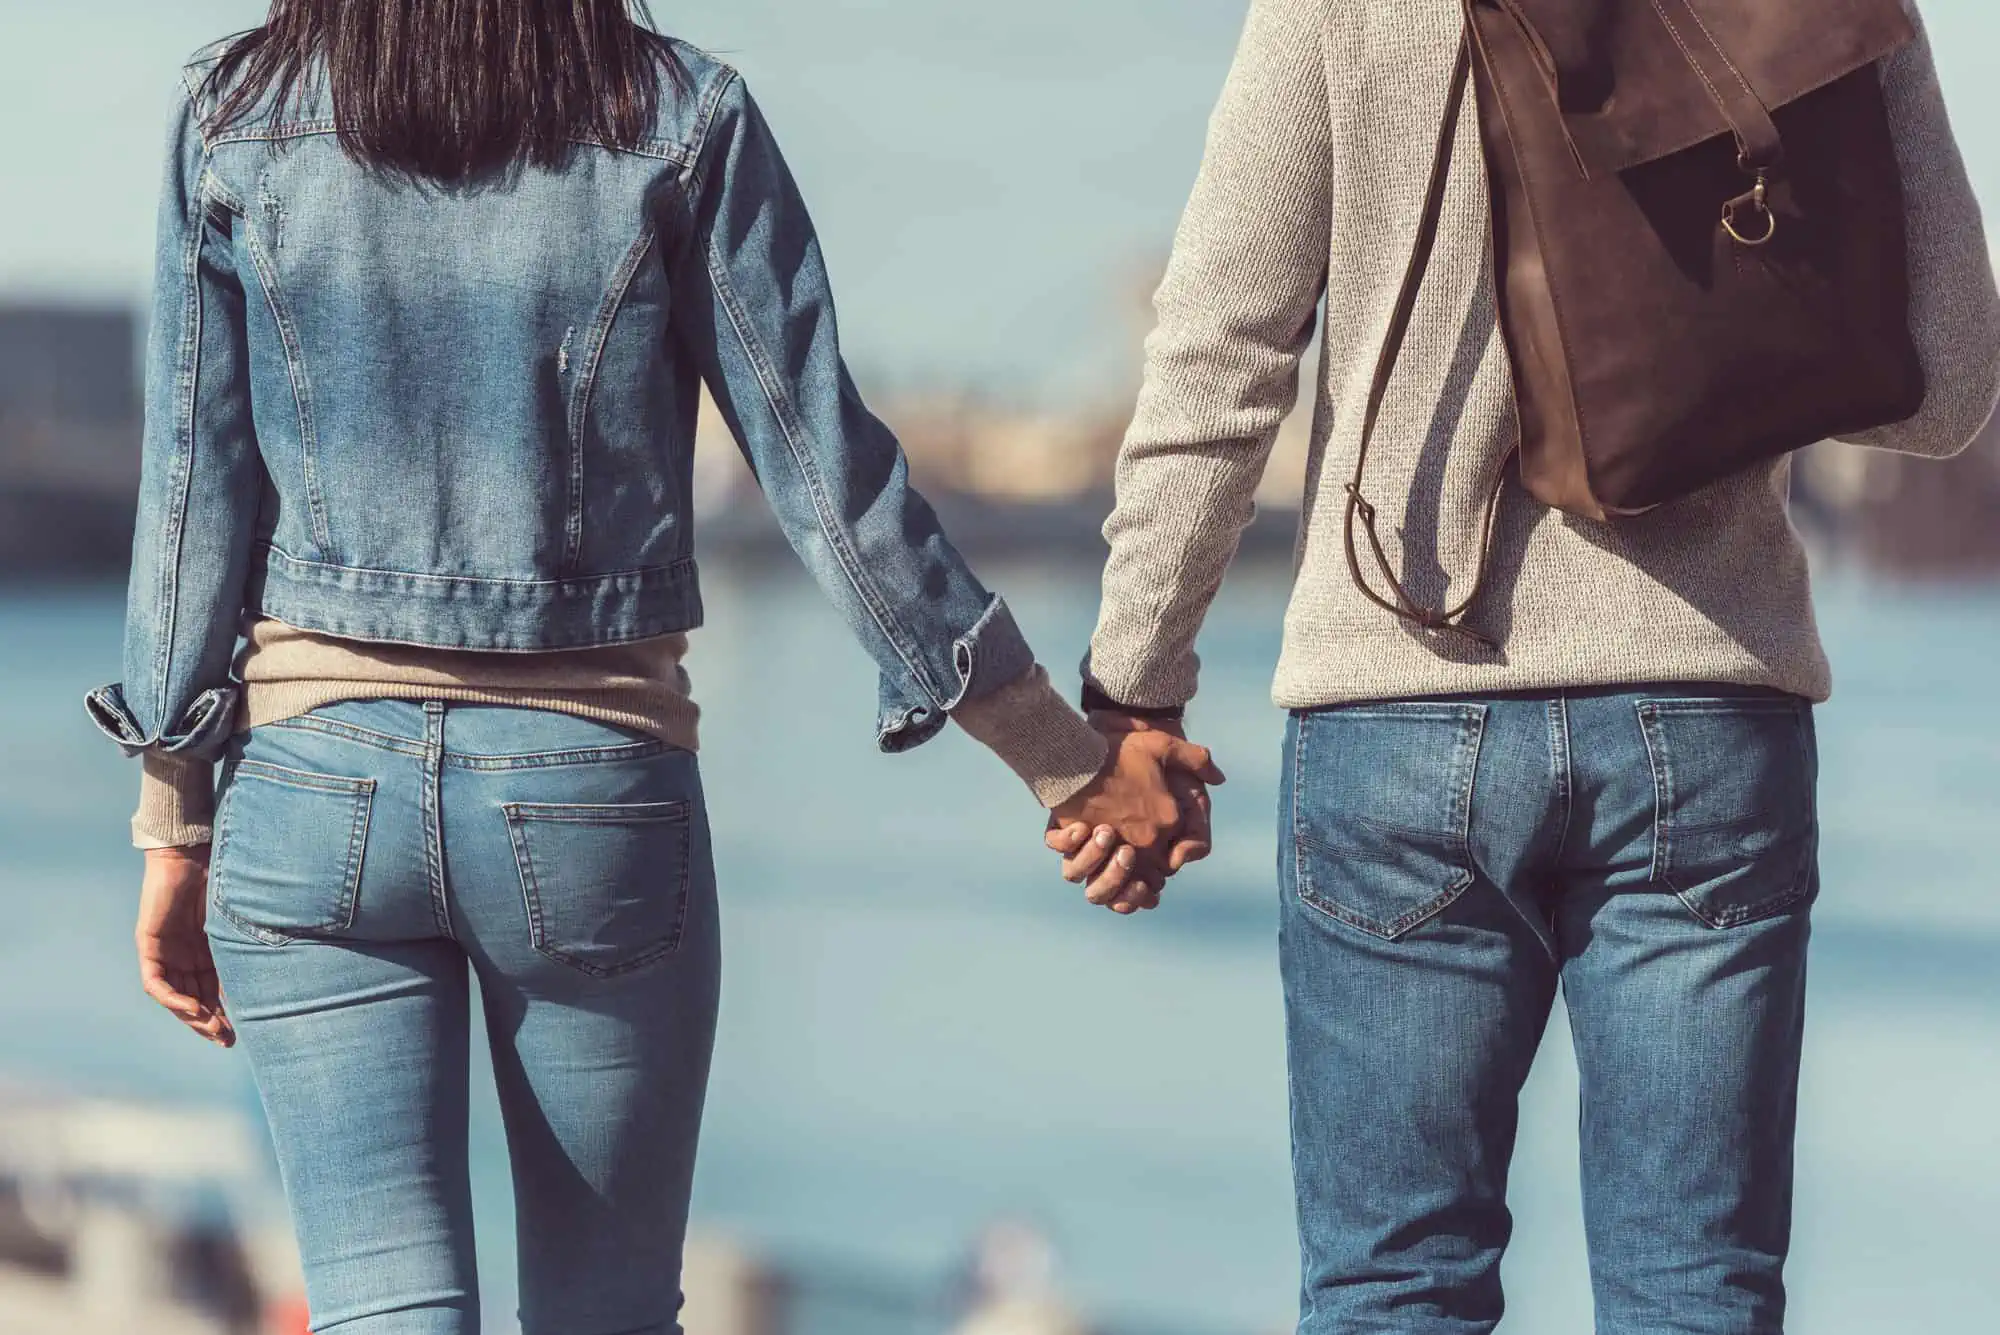 how to tell when holding hands means more